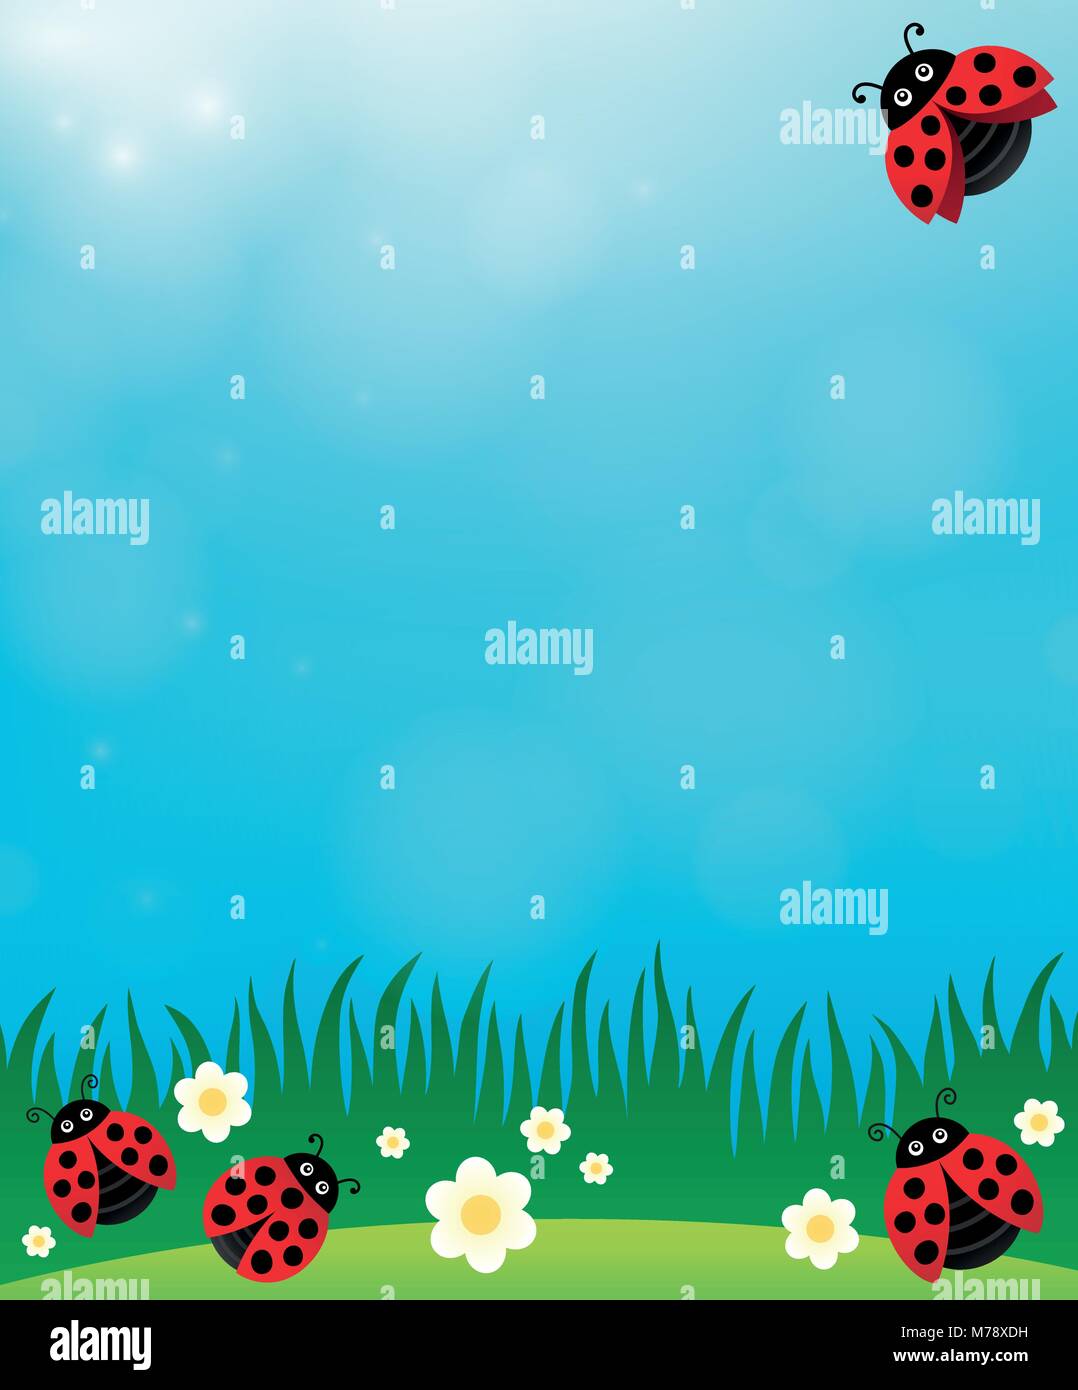 Spring background with ladybugs 3 - eps10 vector illustration. Stock Vector